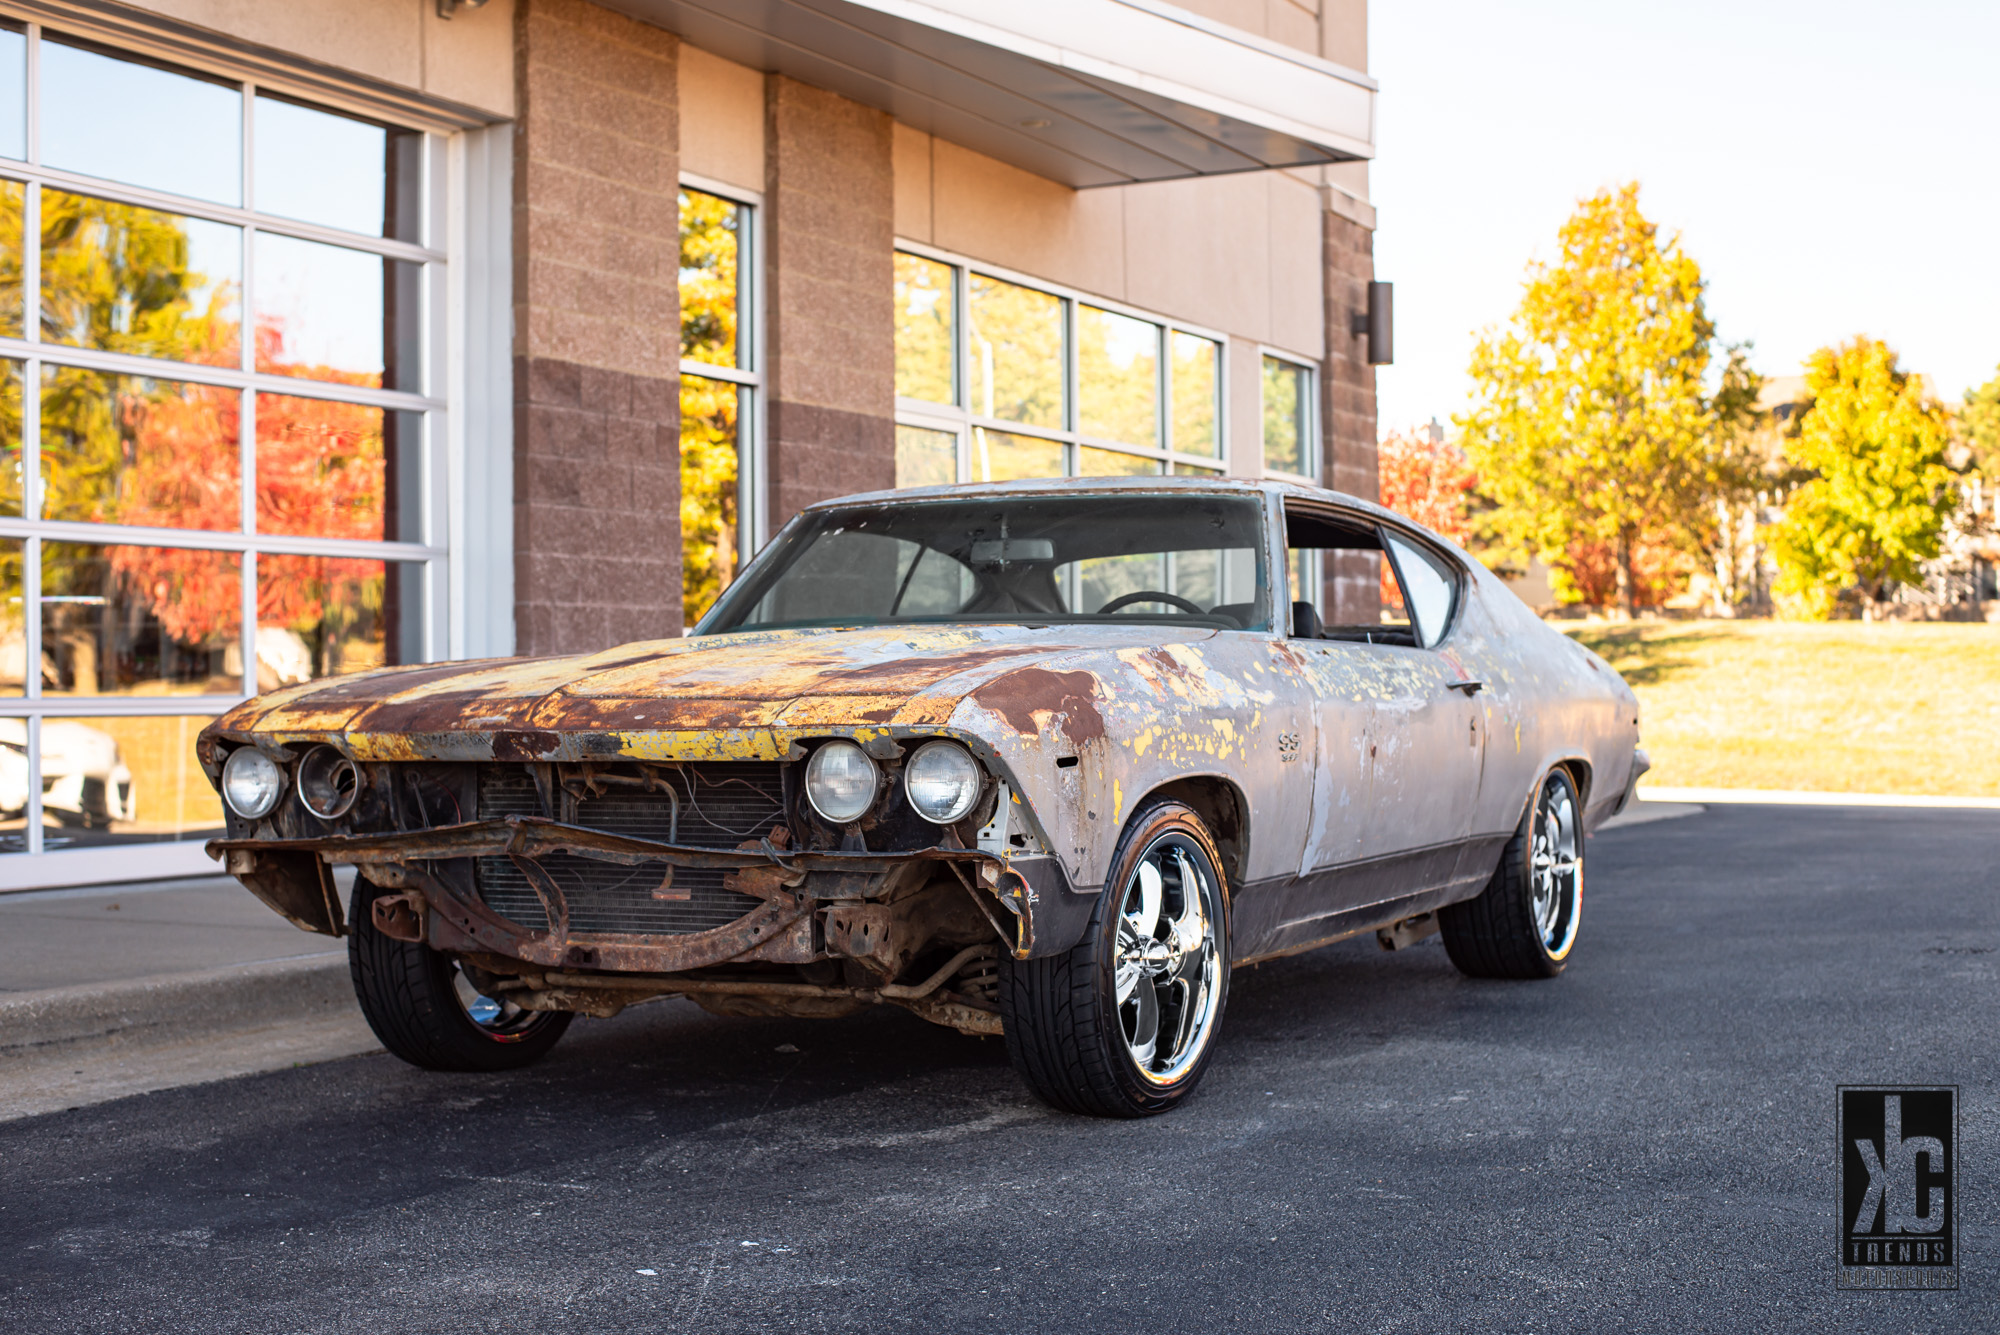  Chevrolet Chevelle with Ridler Wheels 695